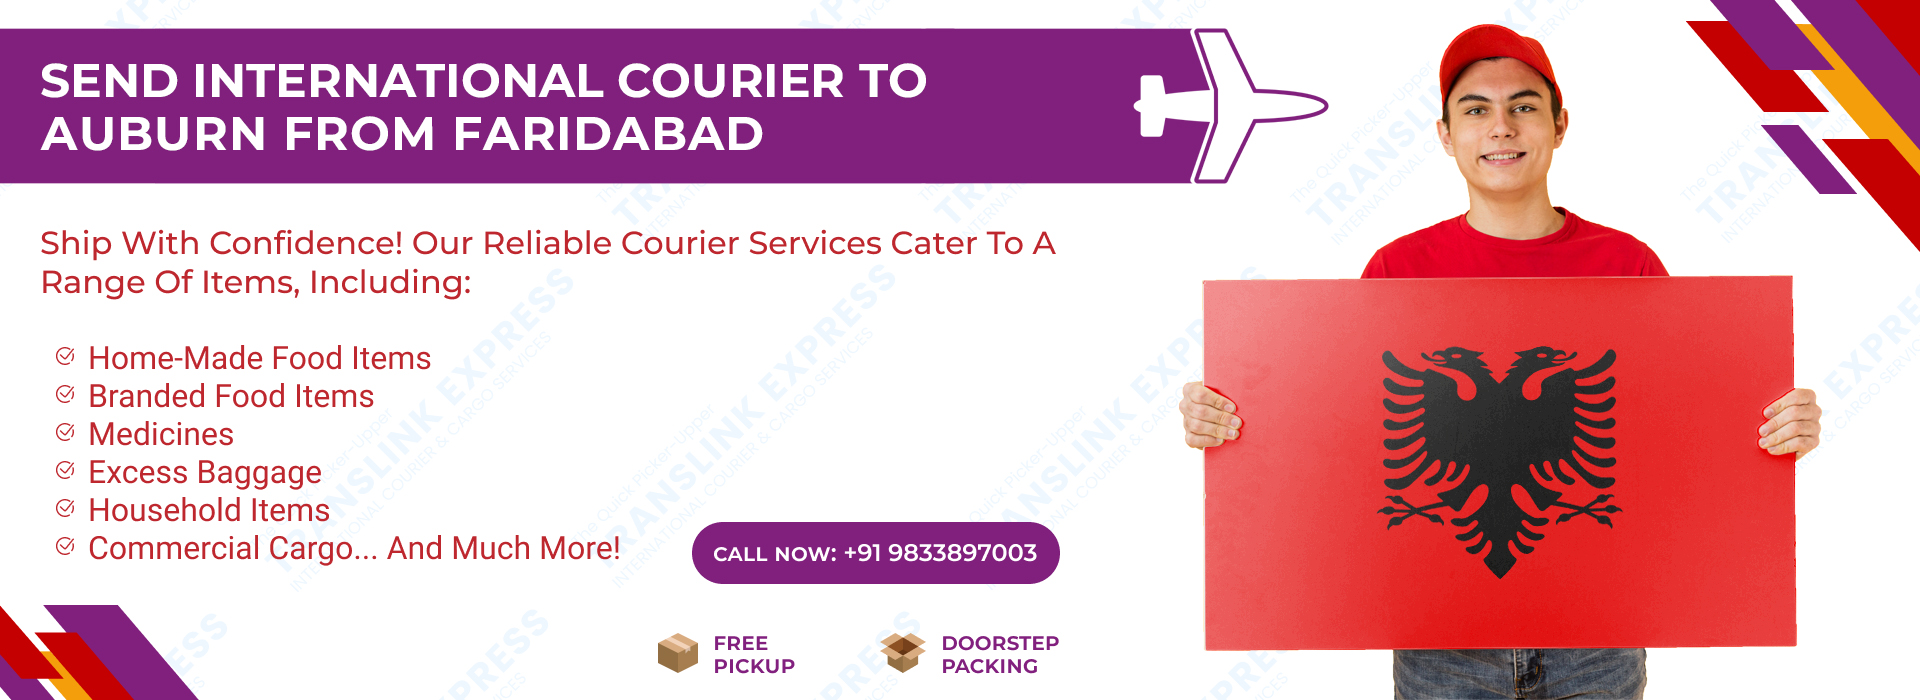 Courier to Auburn From Faridabad